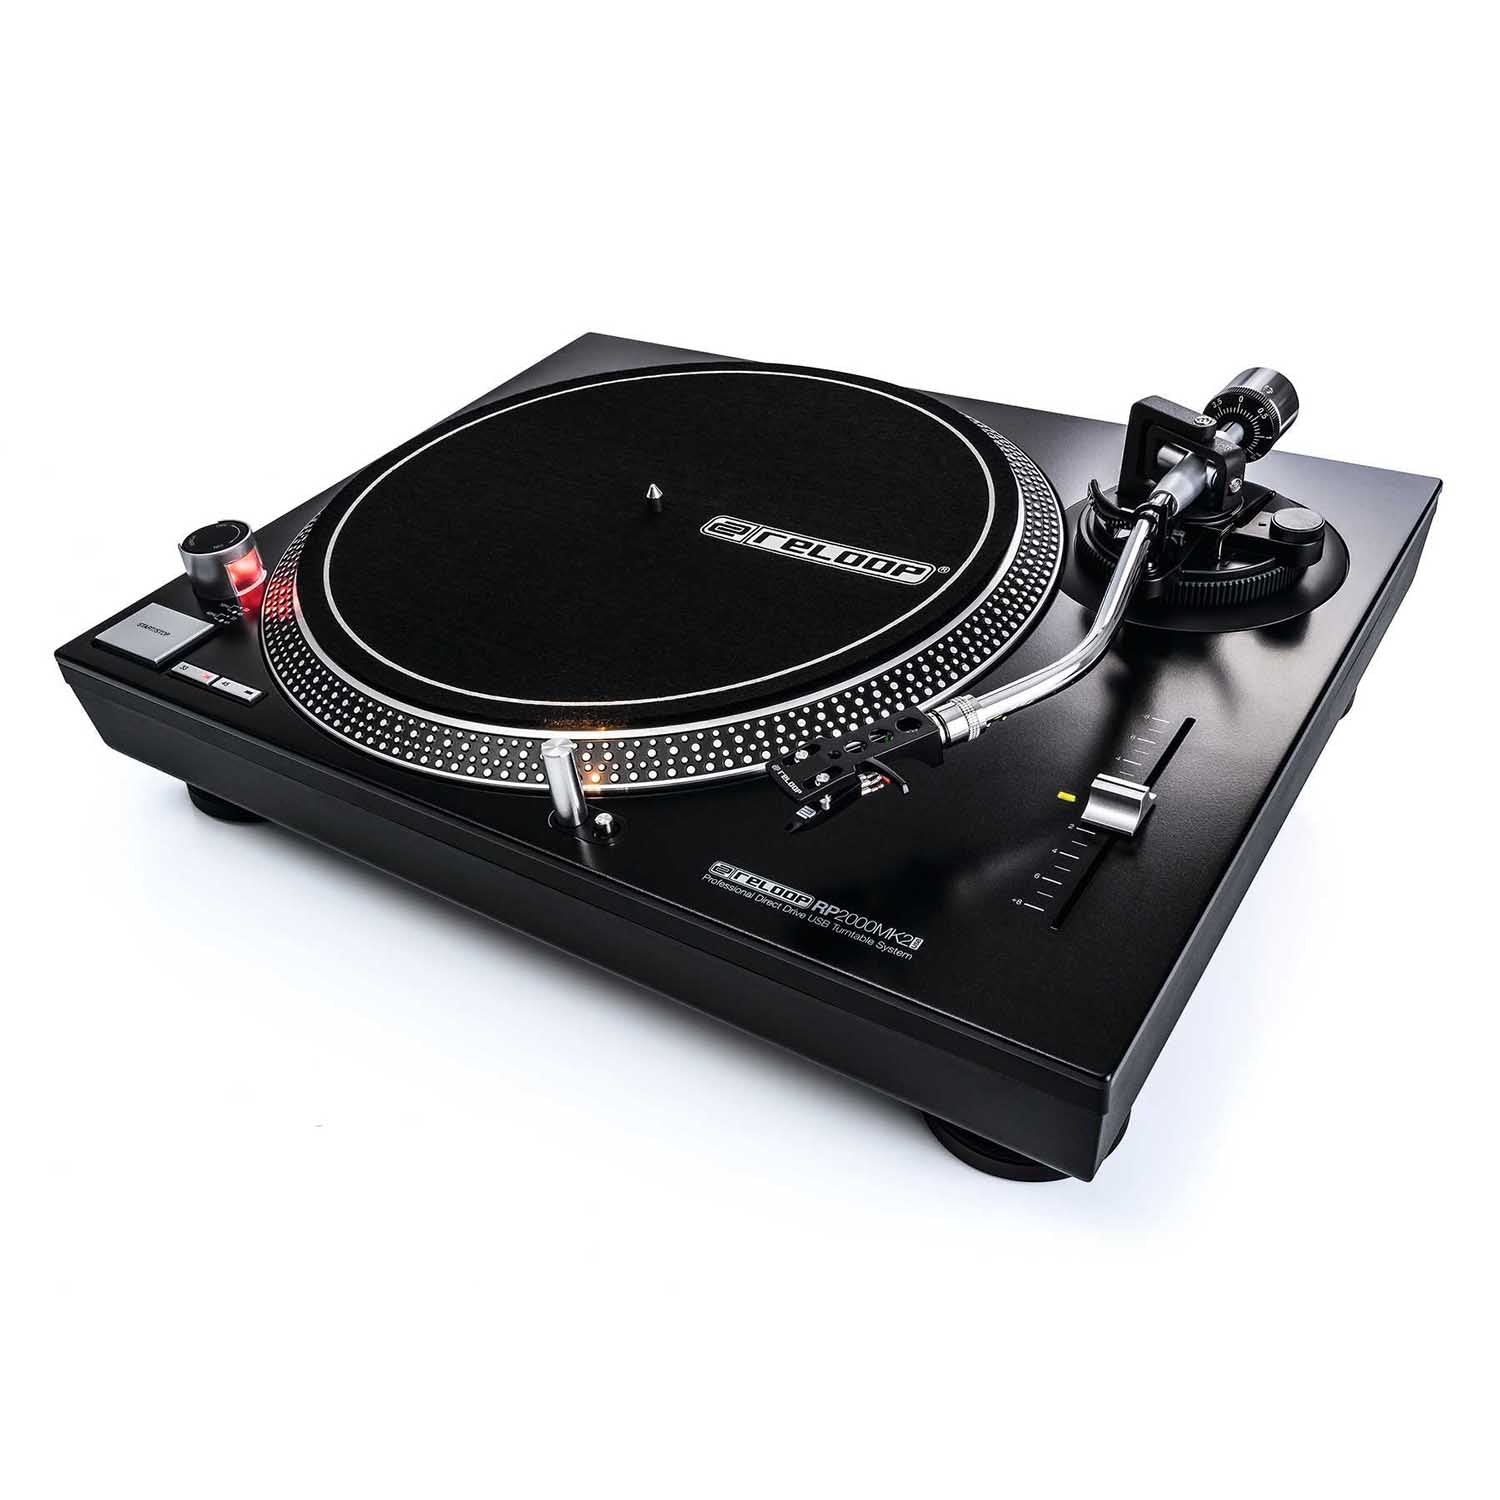 Reloop RP-2000 USB MK2 Professional Direct Drive USB Turntable System - Hollywood DJ